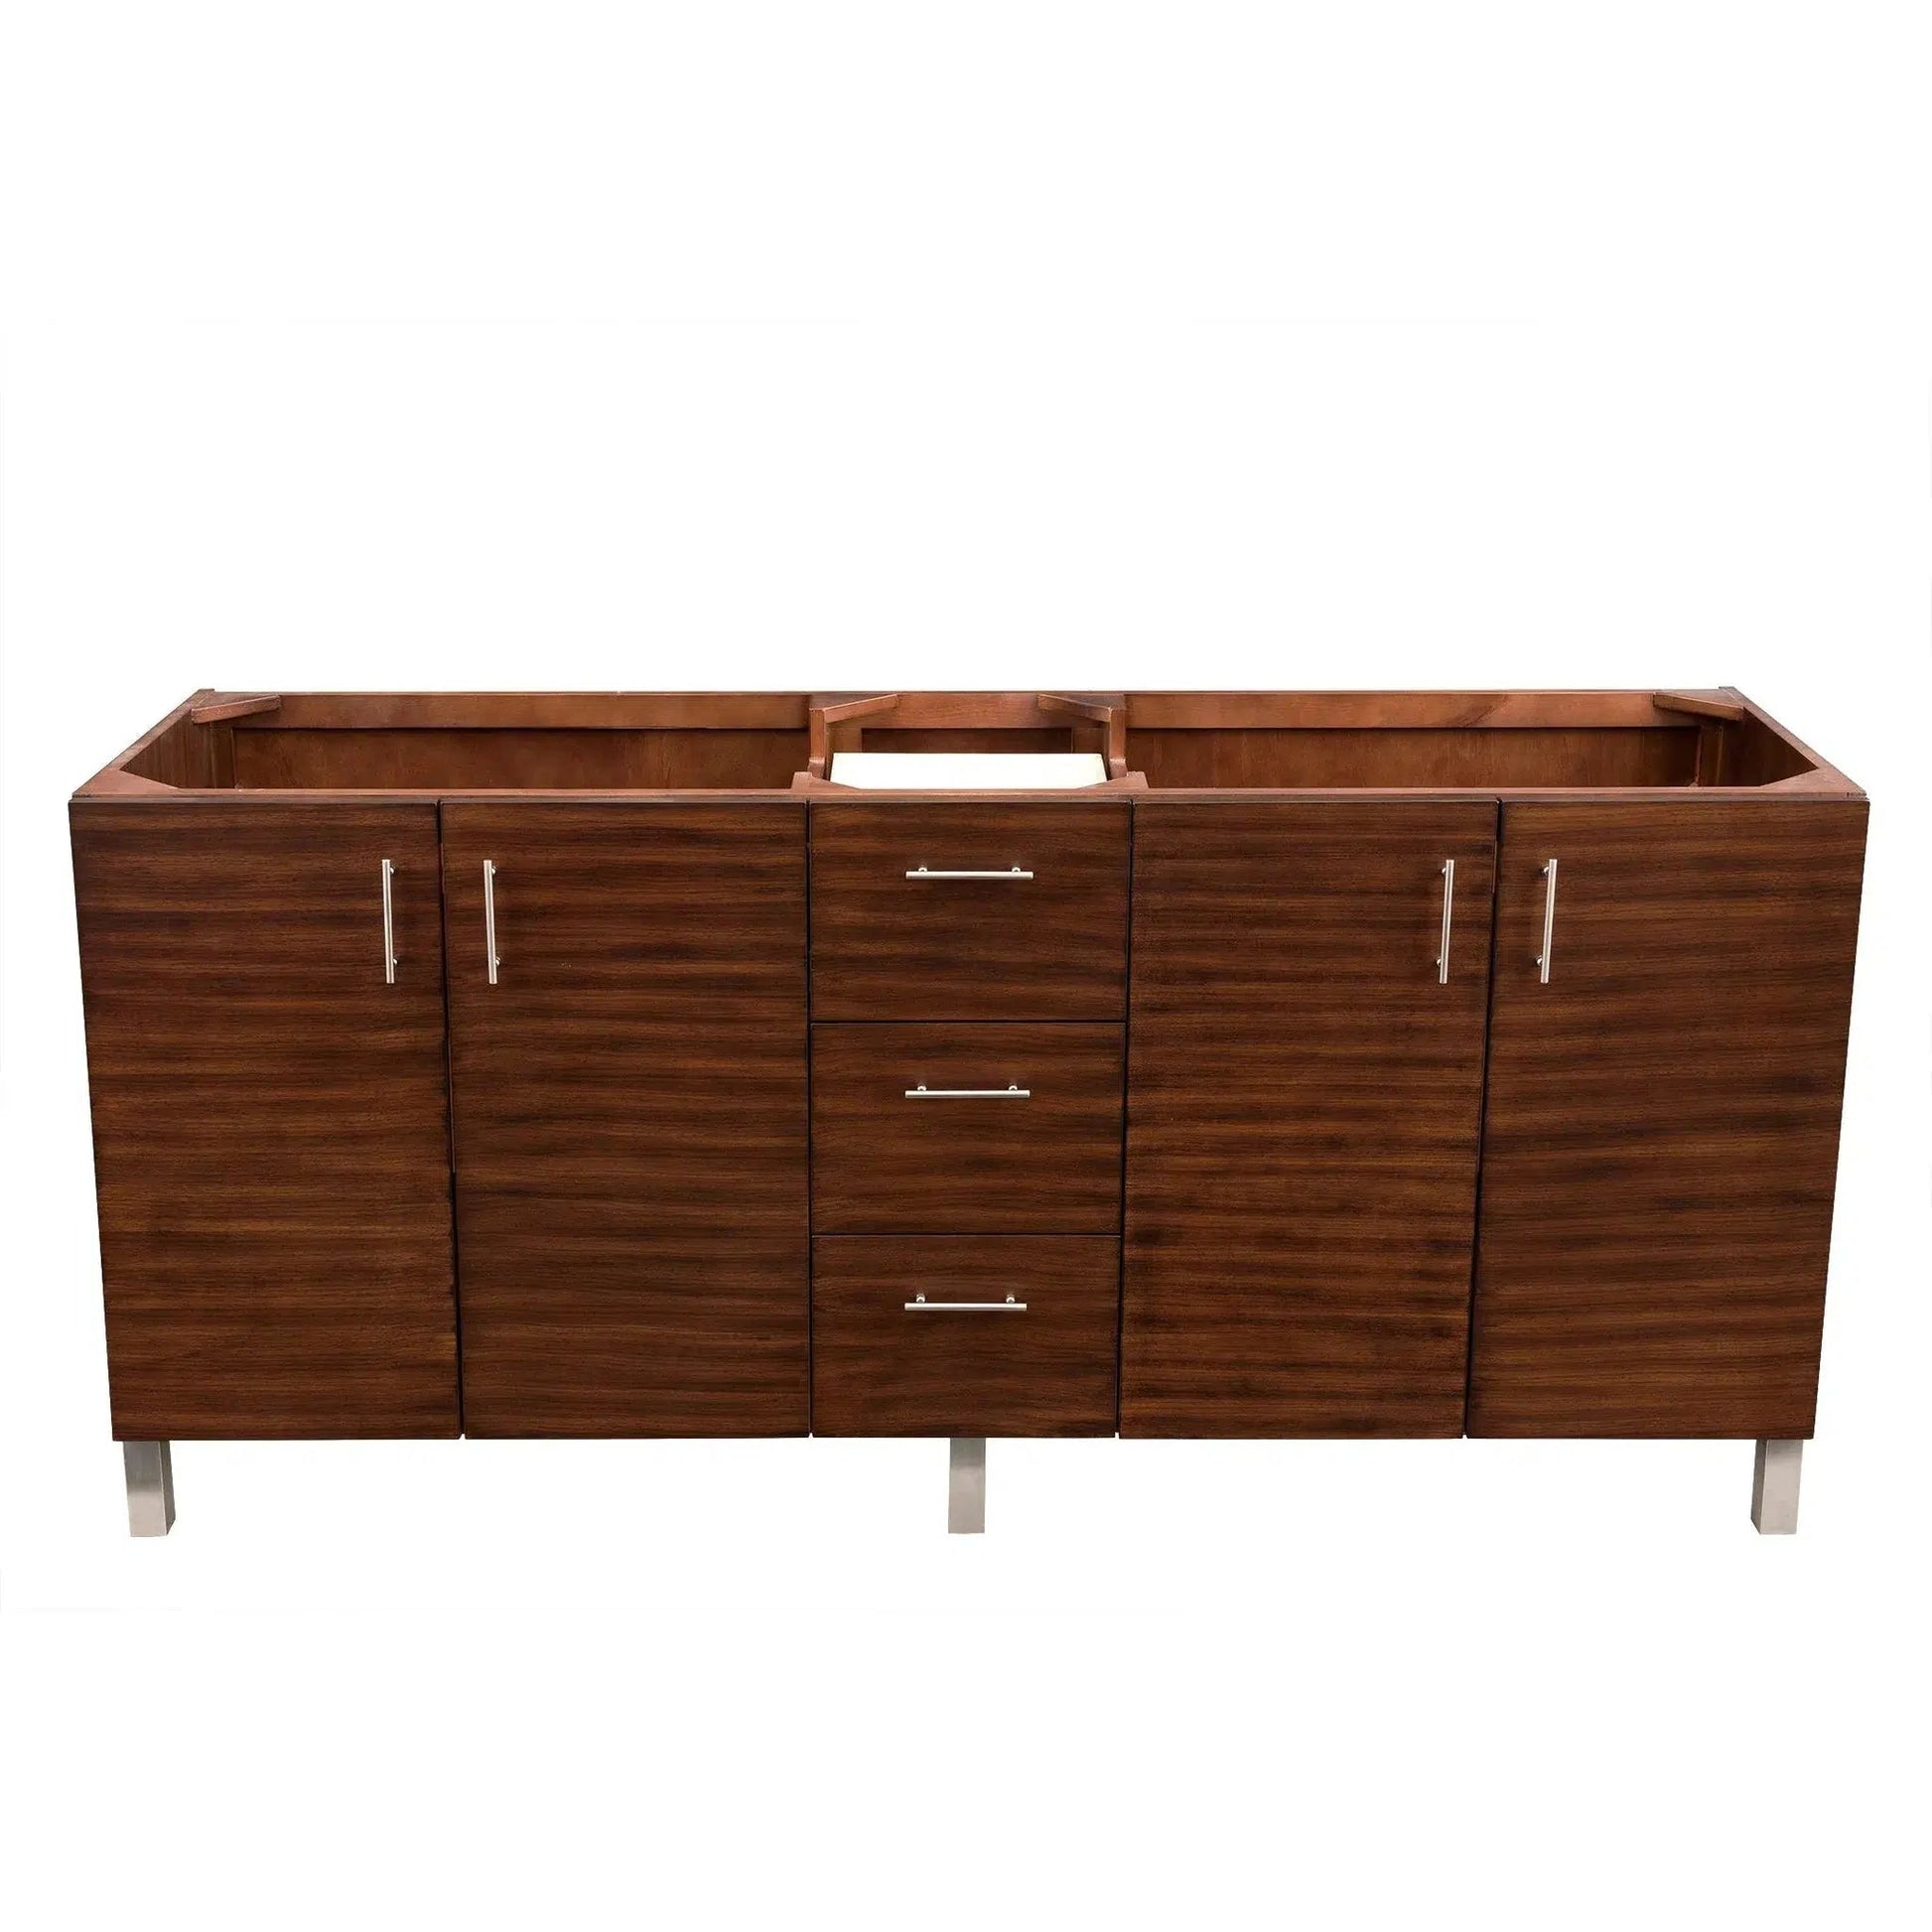 James Martin Metropolitan 72" Double American Walnut Bathroom Vanity With 1" Arctic Fall Solid Surface Top and Rectangular Ceramic Sink